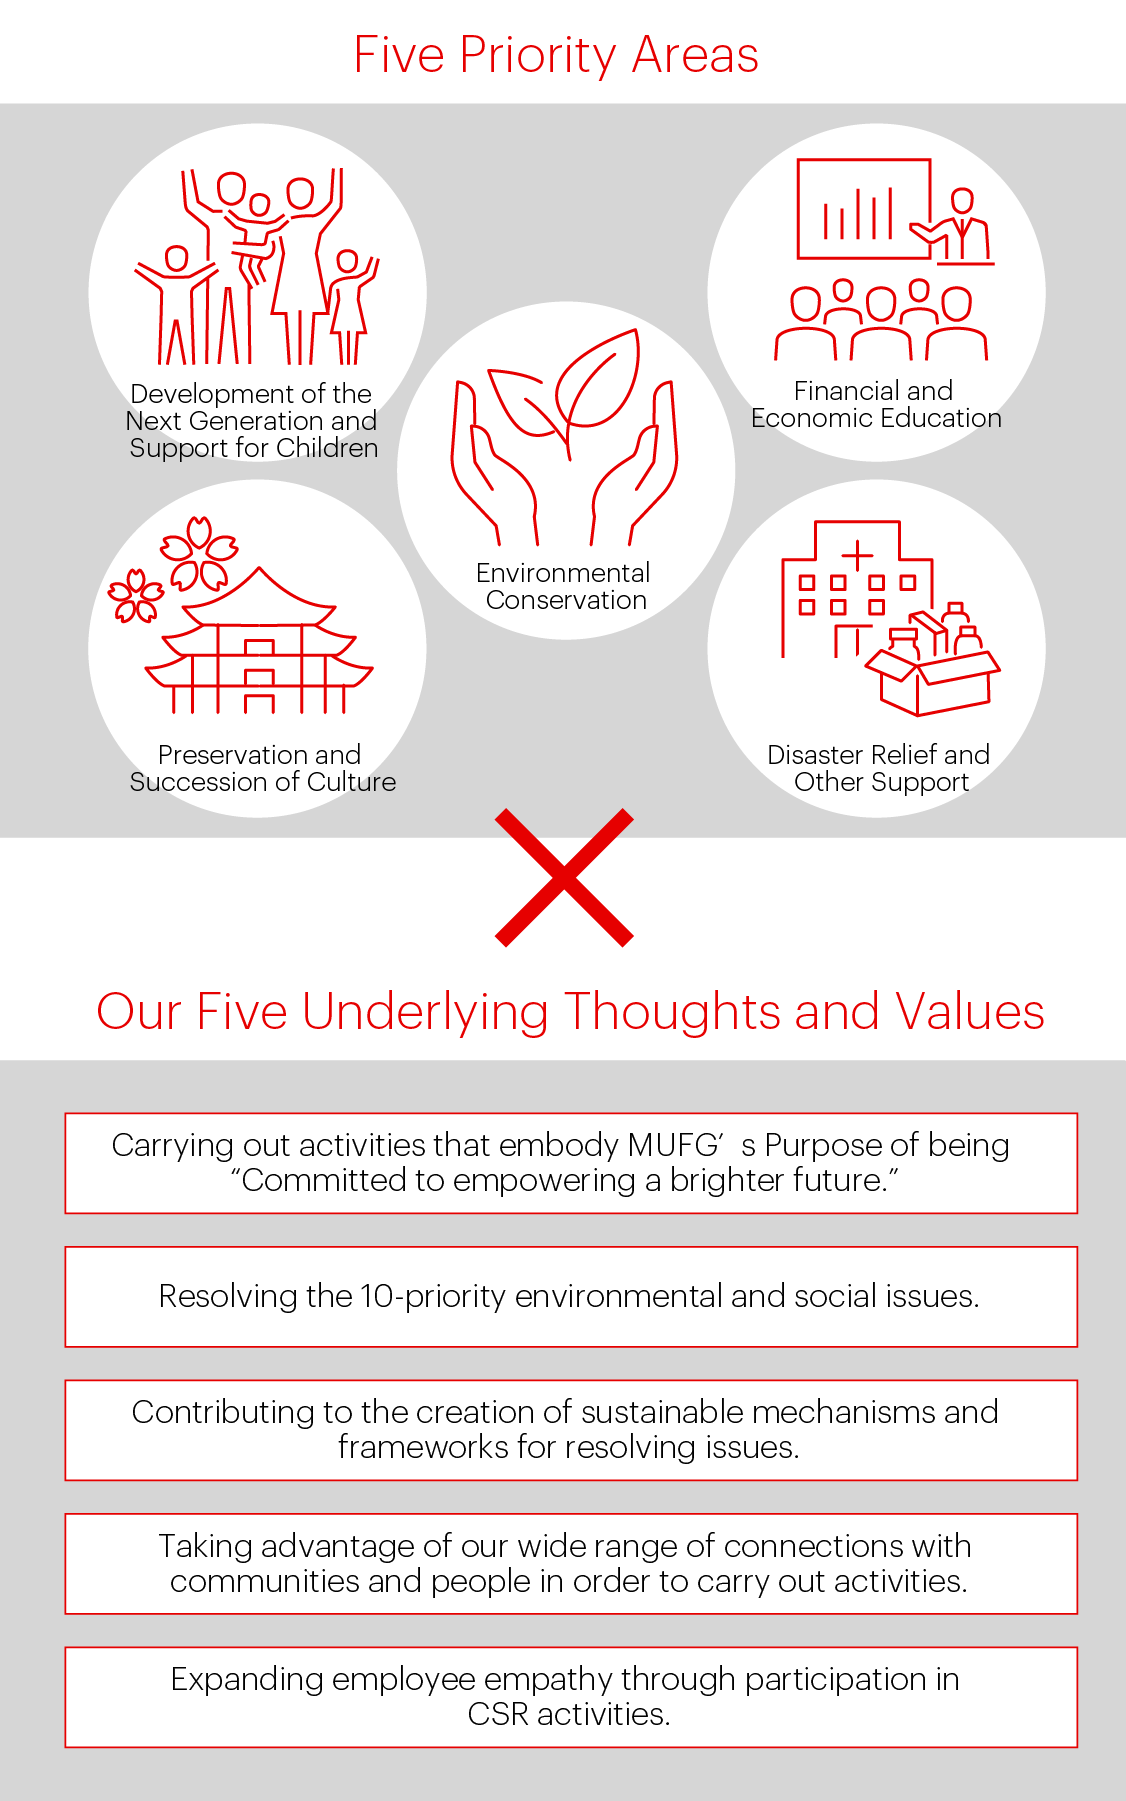 Five Priority Areas and Our Underlying Thoughts and Values